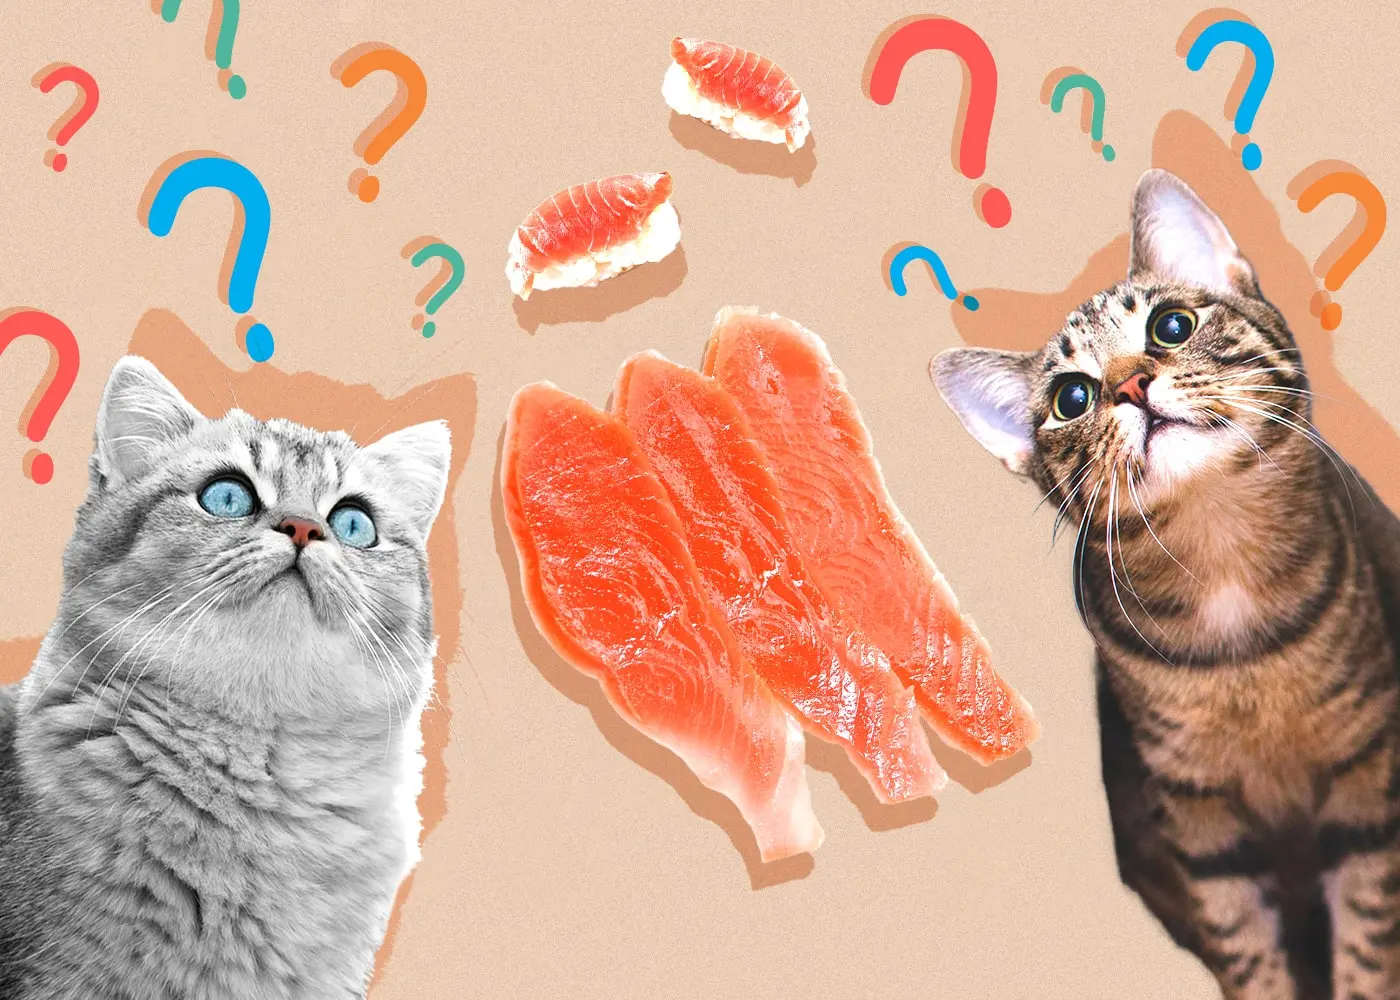 cat smoked salmon - Is it OK to give cats smoked fish